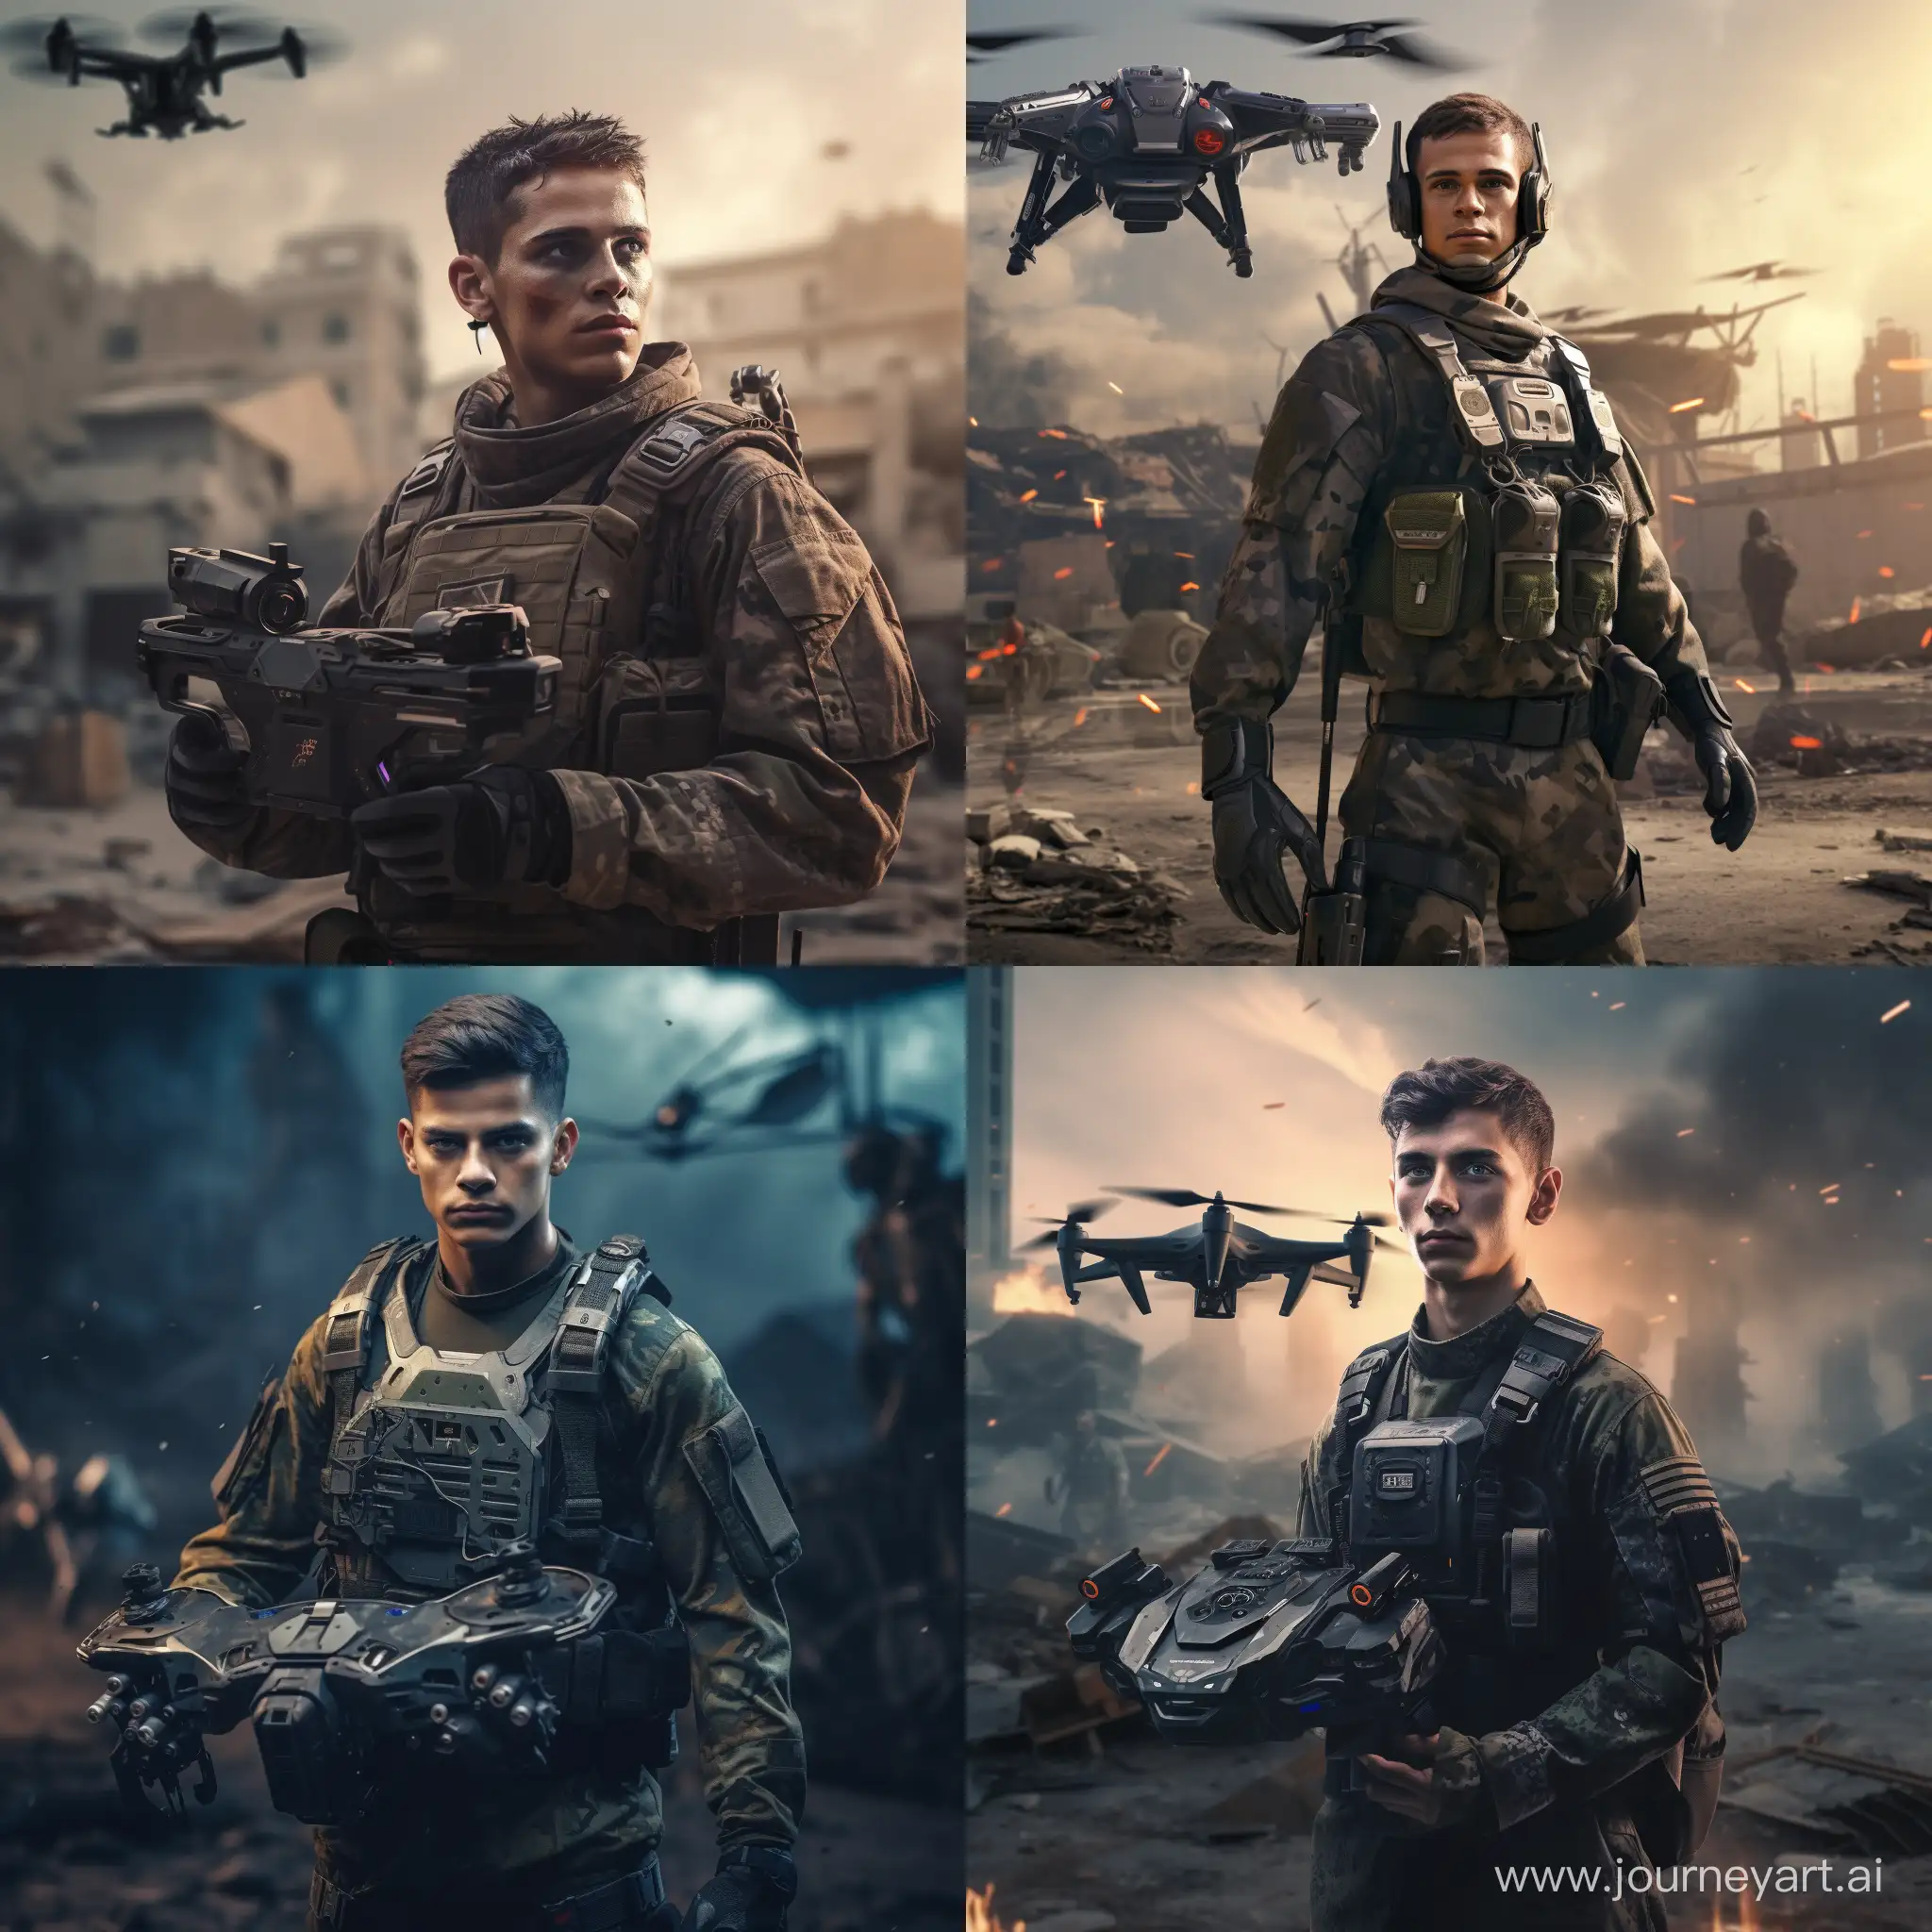 Futuristic-Soldier-with-Drone-Technology-and-Warfare-Concept